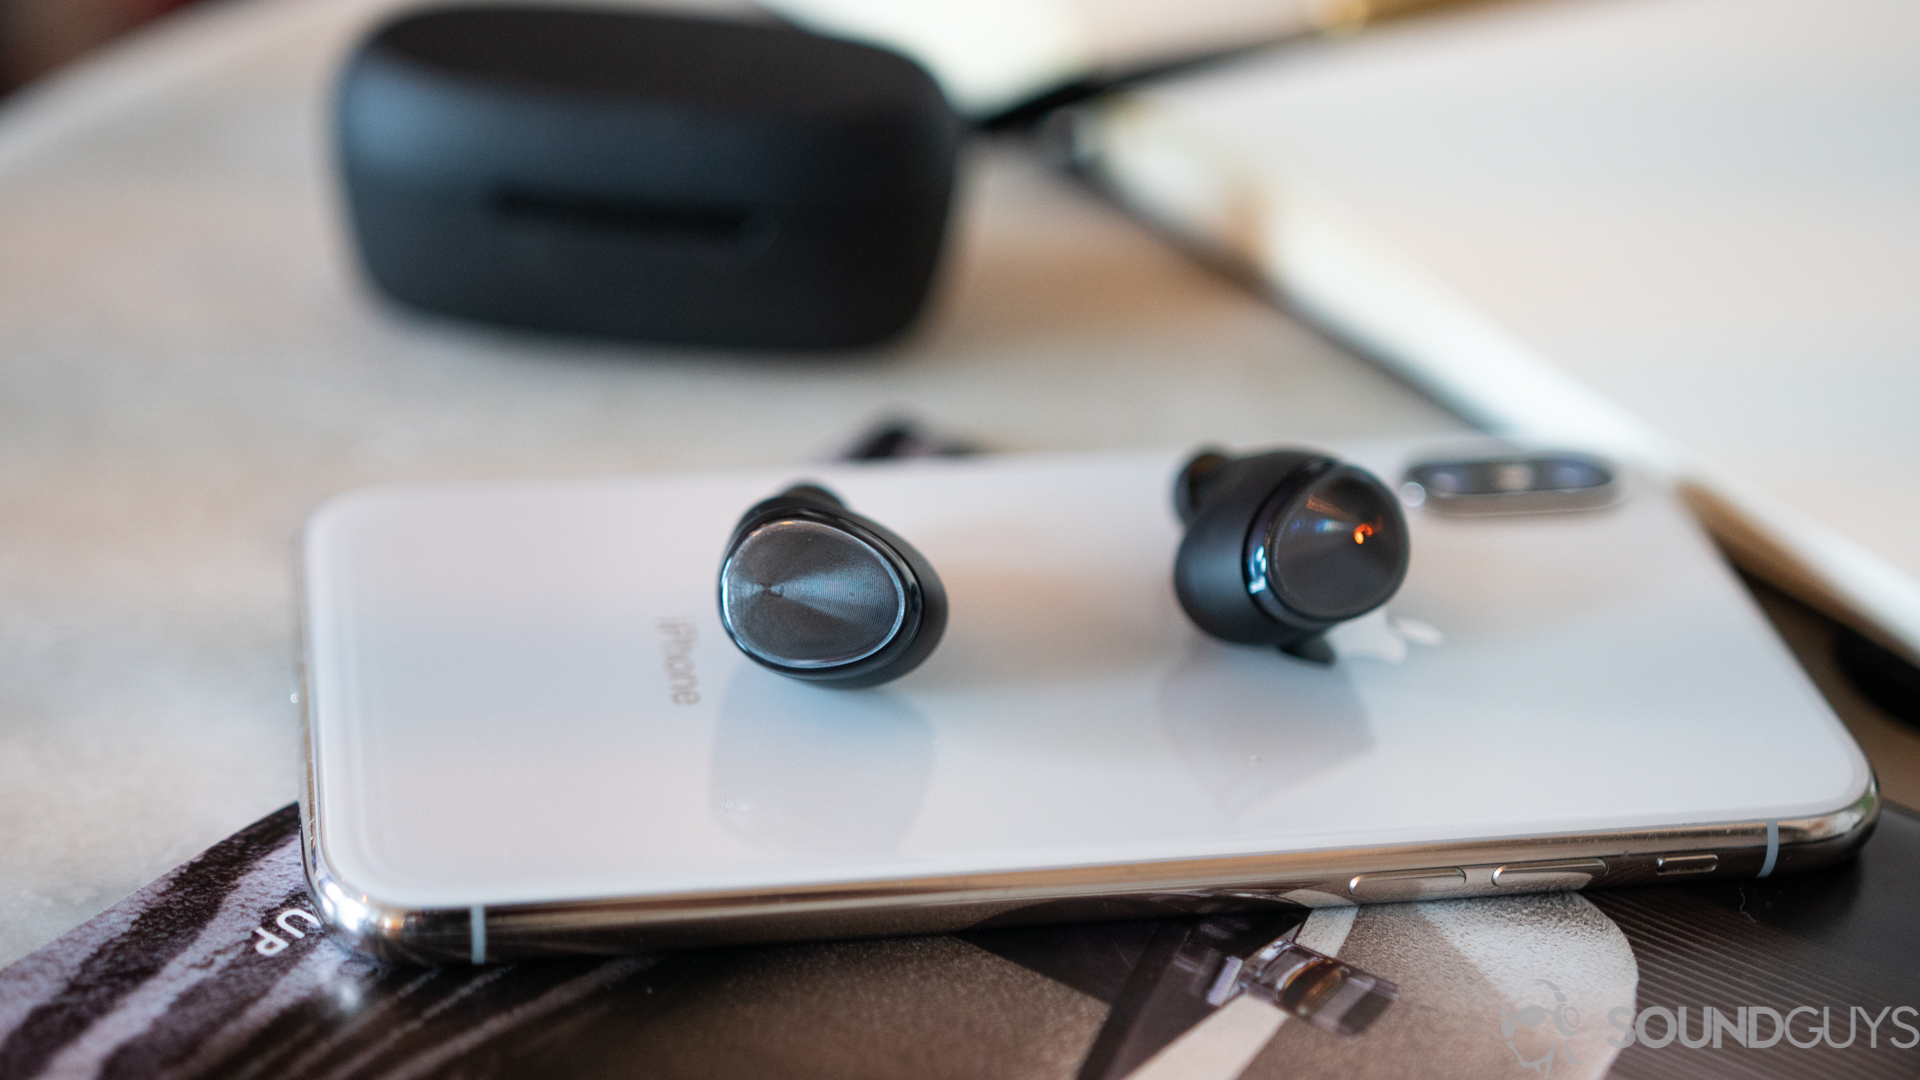 Optoma Be Free6 earbuds on iPhone X